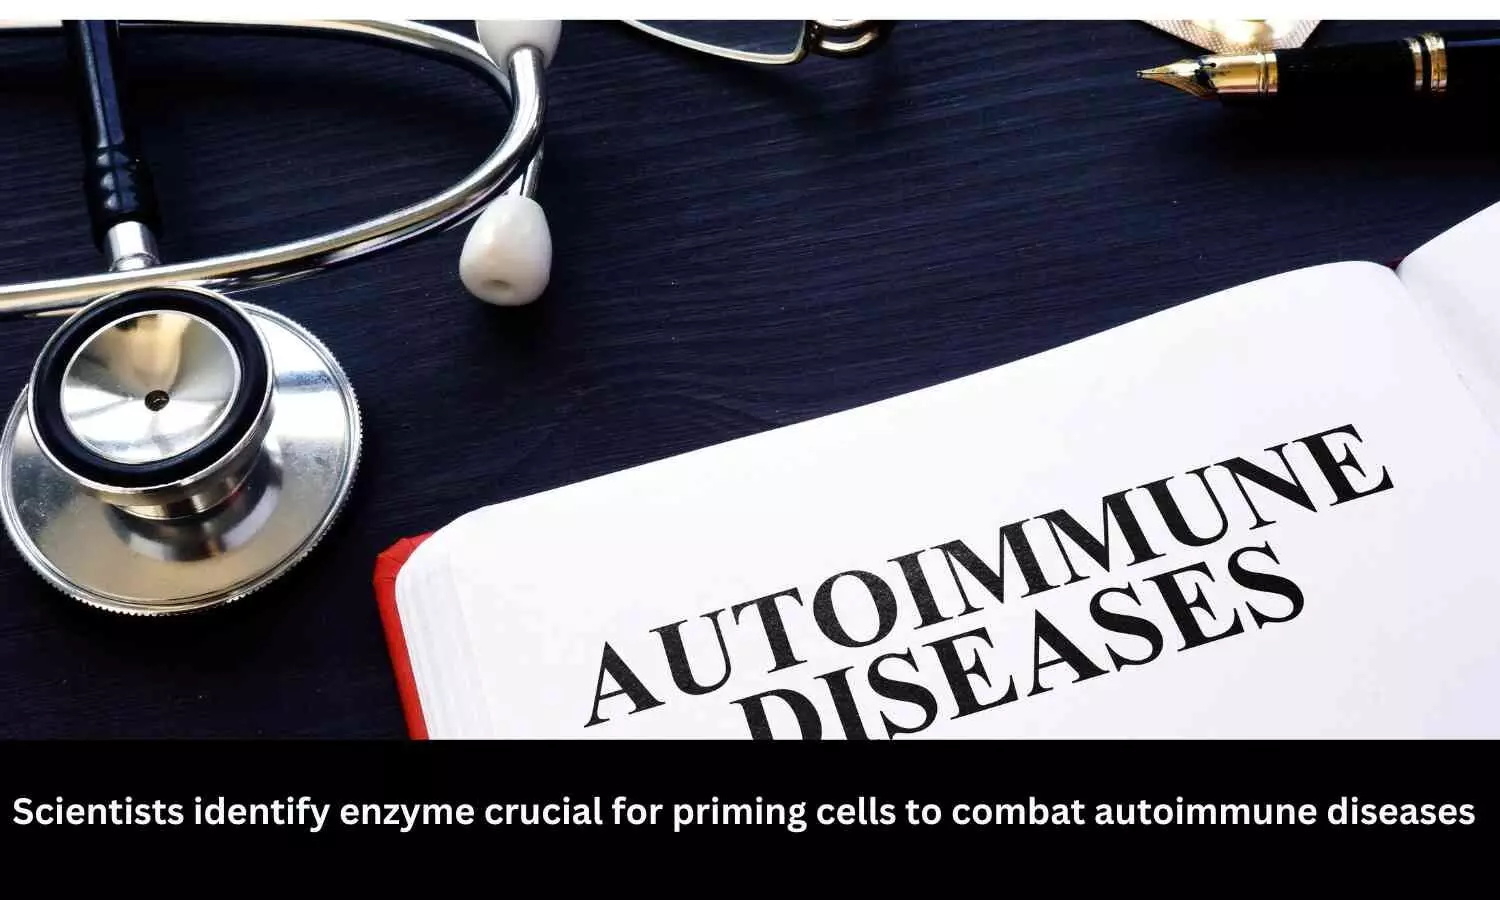 Scientists identify enzyme crucial for priming cells to combat autoimmune diseases